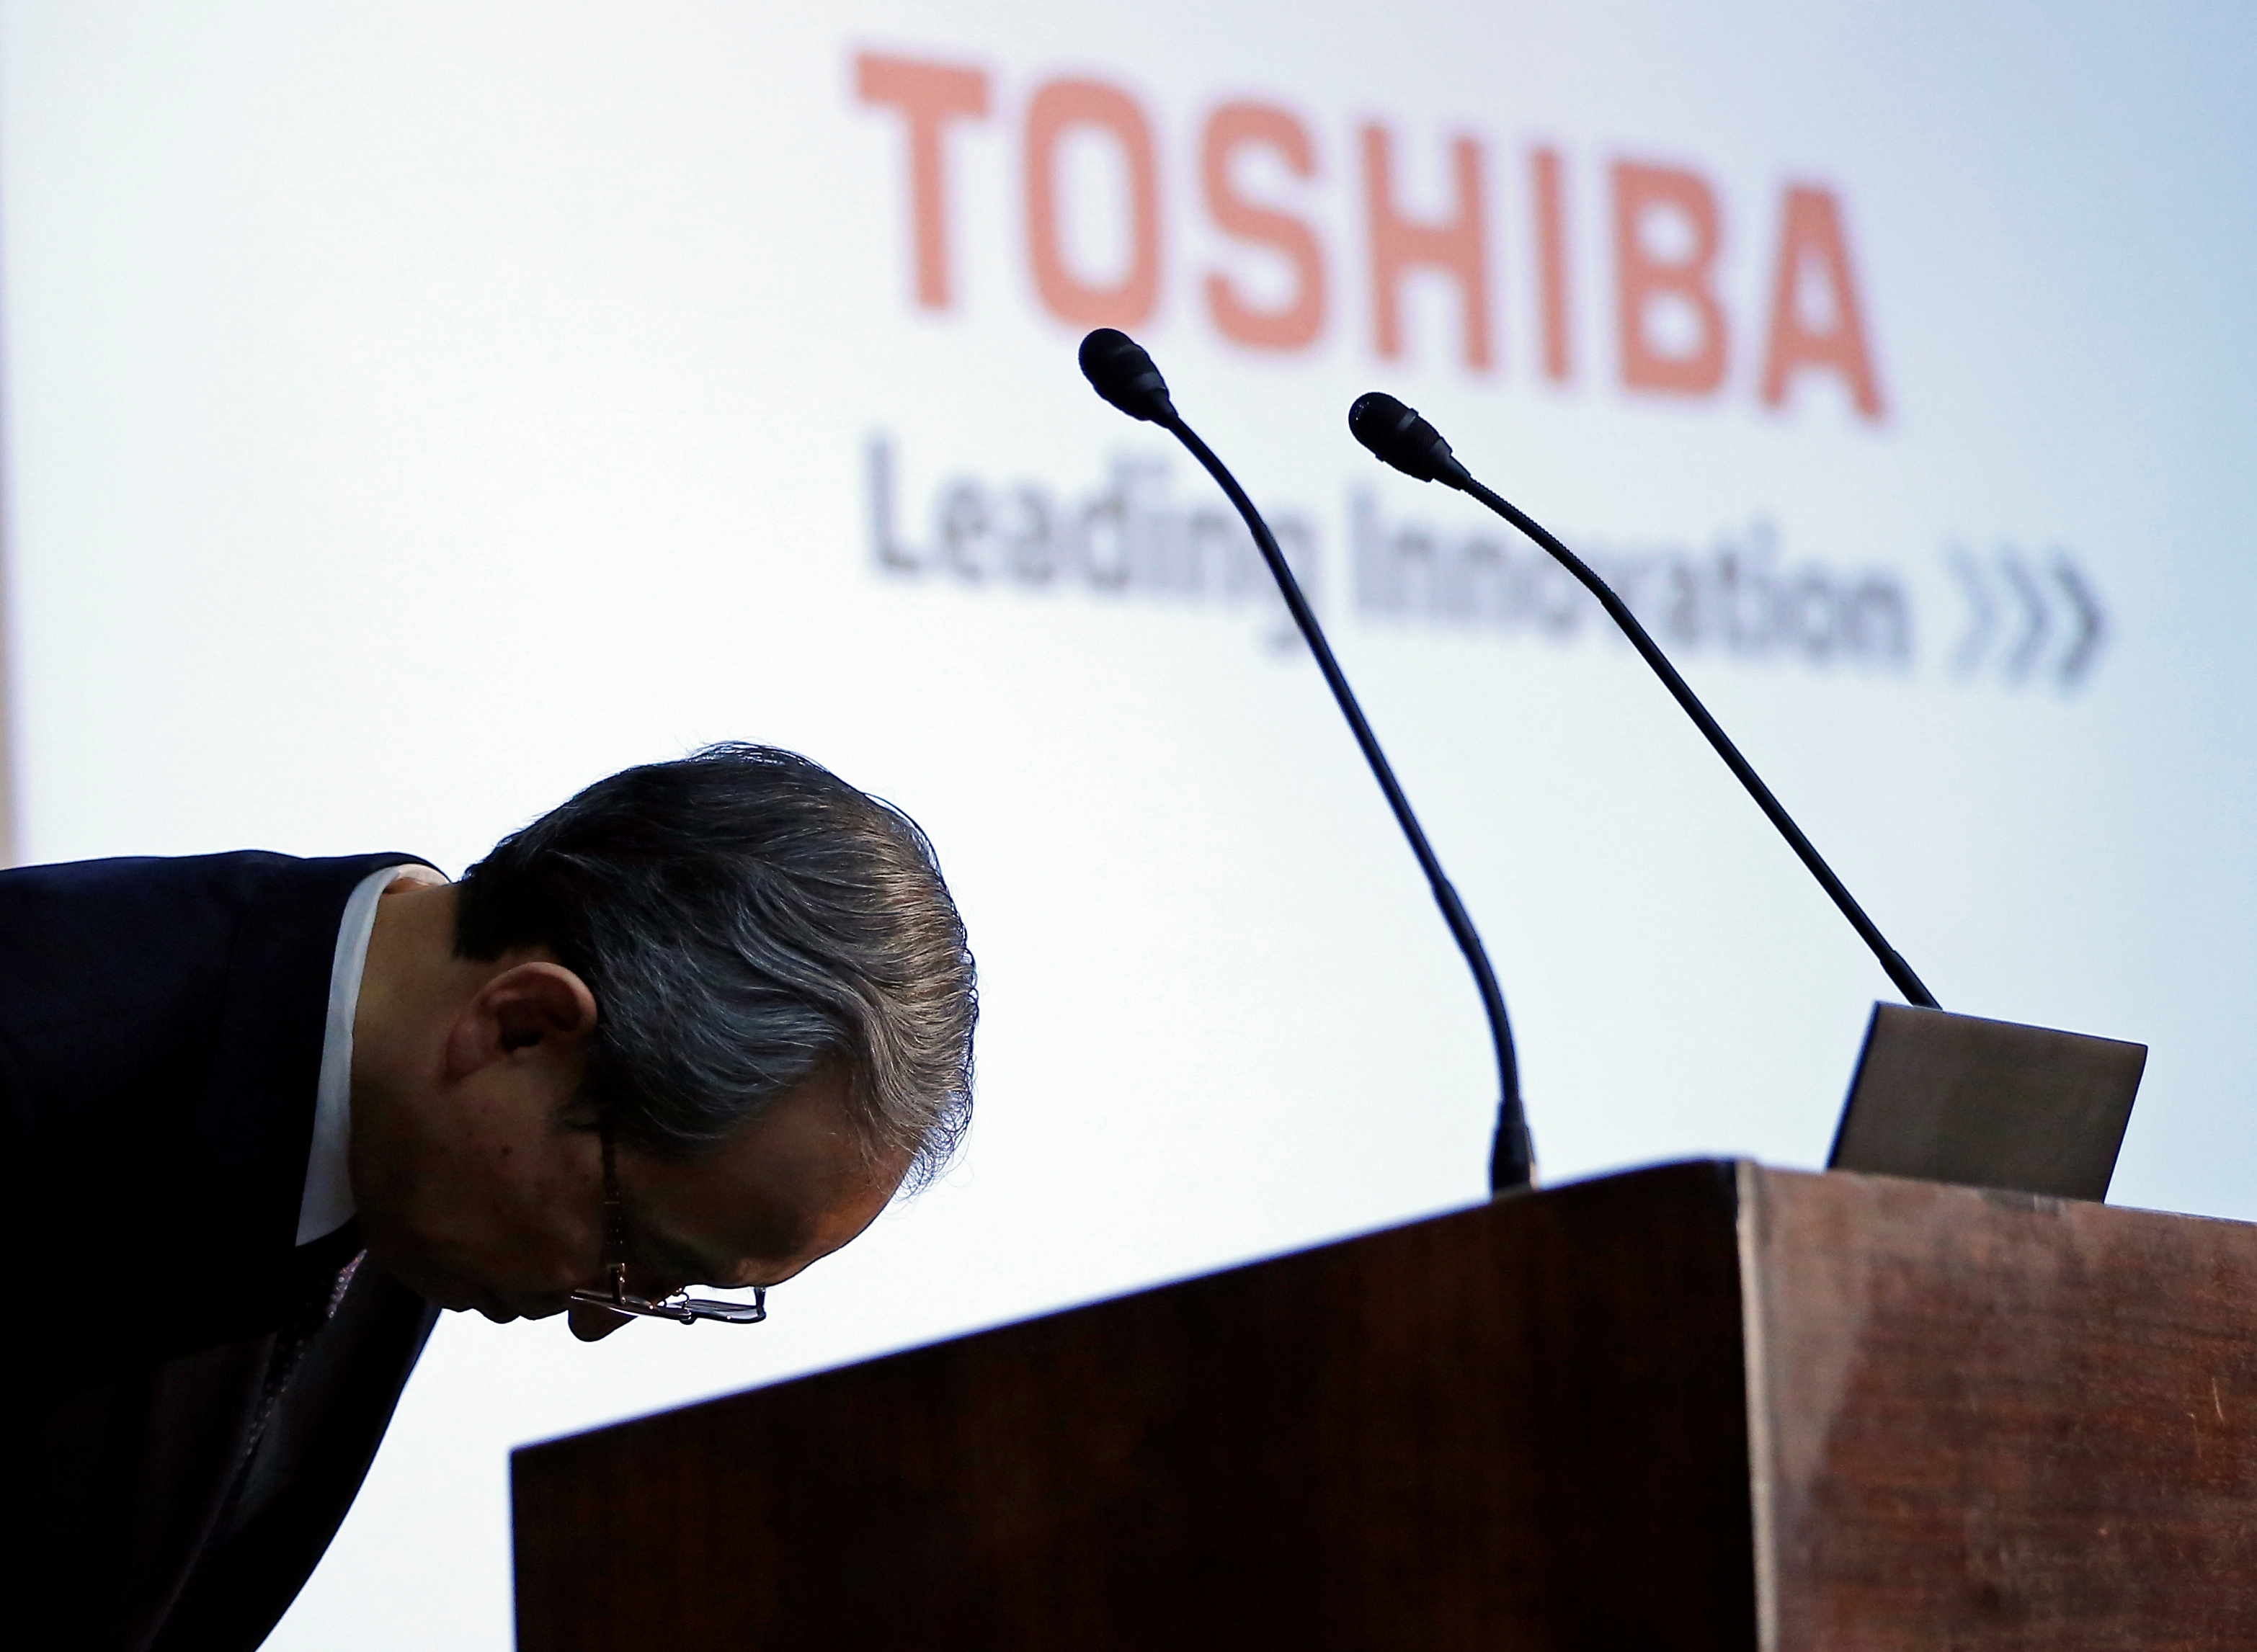 Toshiba Corp CEO Satoshi Tsunakawa bows during a news conference after asking regulators for extension on financial filing and deal on chip unit sale, at the company headquarters in Tokyo